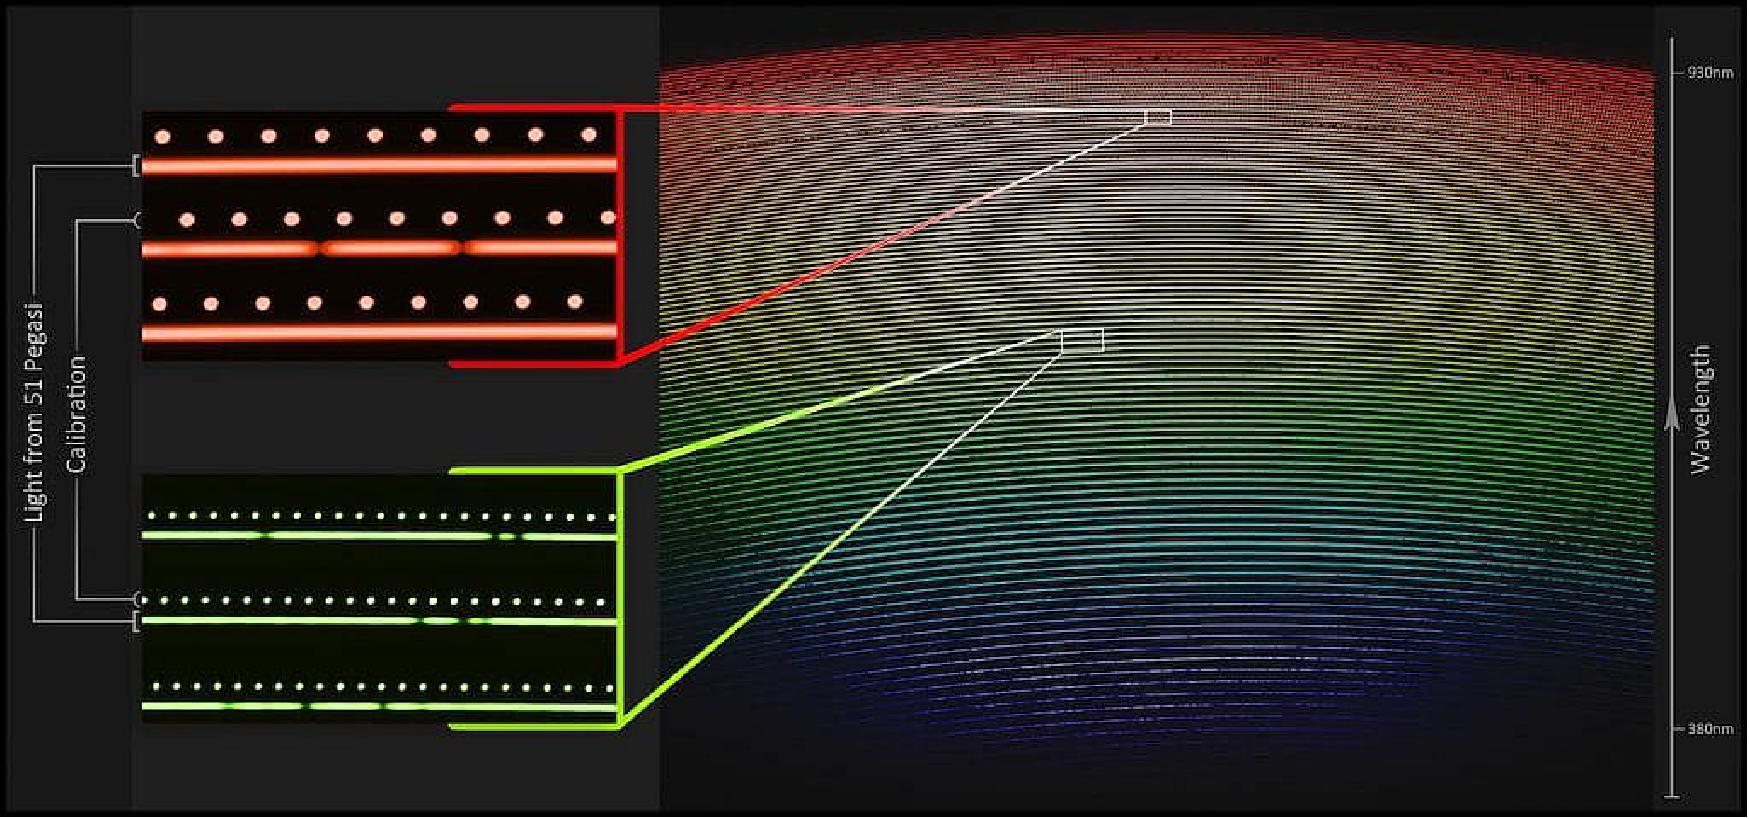 Figure 8: First light spectrum of 51 Pegasi as captured by NEID on the WIYN telescope with blowup of a small section of the spectrum. The right panel shows the light from the star, highly dispersed by NEID, from short wavelengths (bluer colors) to long wavelengths (redder colors). The colors shown, which approximate the true color of the starlight at each part of image, are included for illustrative purposes only. The region in the small white box in the right panel, when expanded (left panel), shows the spectrum of the star (longer dashed lines) and the light from the wavelength calibration source (dots). Deficits of light (dark interruptions) in the stellar spectrum, are due to stellar absorption lines — “fingerprints” of the elements that are present in the atmosphere of the star. By measuring the subtle motion of these features, to bluer or redder wavelengths, astronomers can detect the “wobble” of the star produced in response to its orbiting planet (image credit: Guðmundur Kári Stefánsson/Princeton University/Penn State/NSF’s National Optical-Infrared Astronomy Research Laboratory/KPNO/AURA)